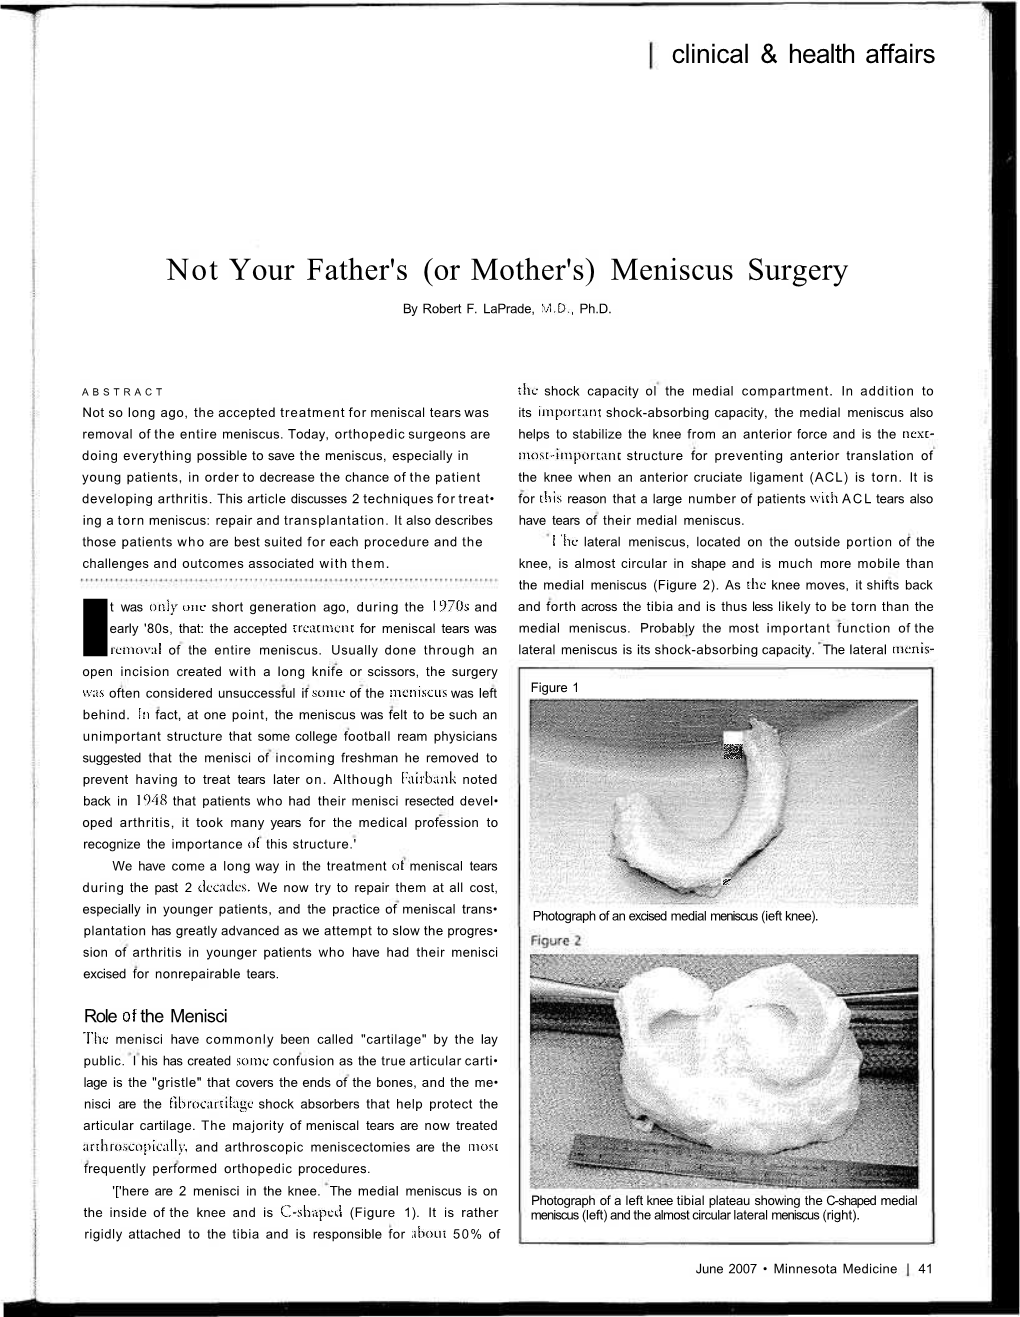 Not Your Father's (Or Mother's) Meniscus Surgery